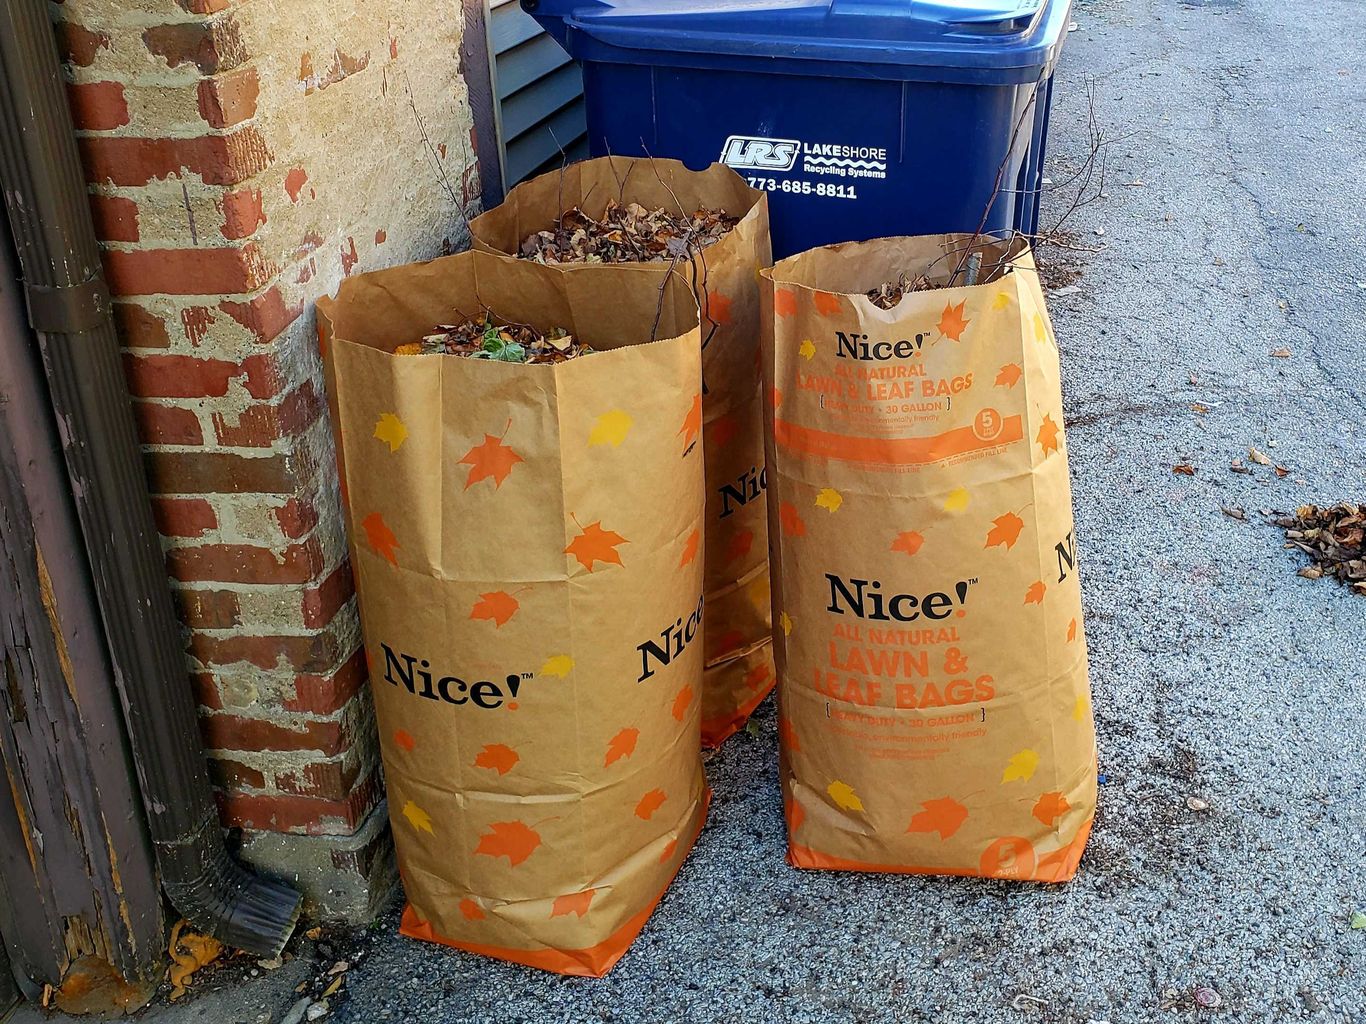 Chicago picking up less yard waste despite more resident requests - Axios  Chicago